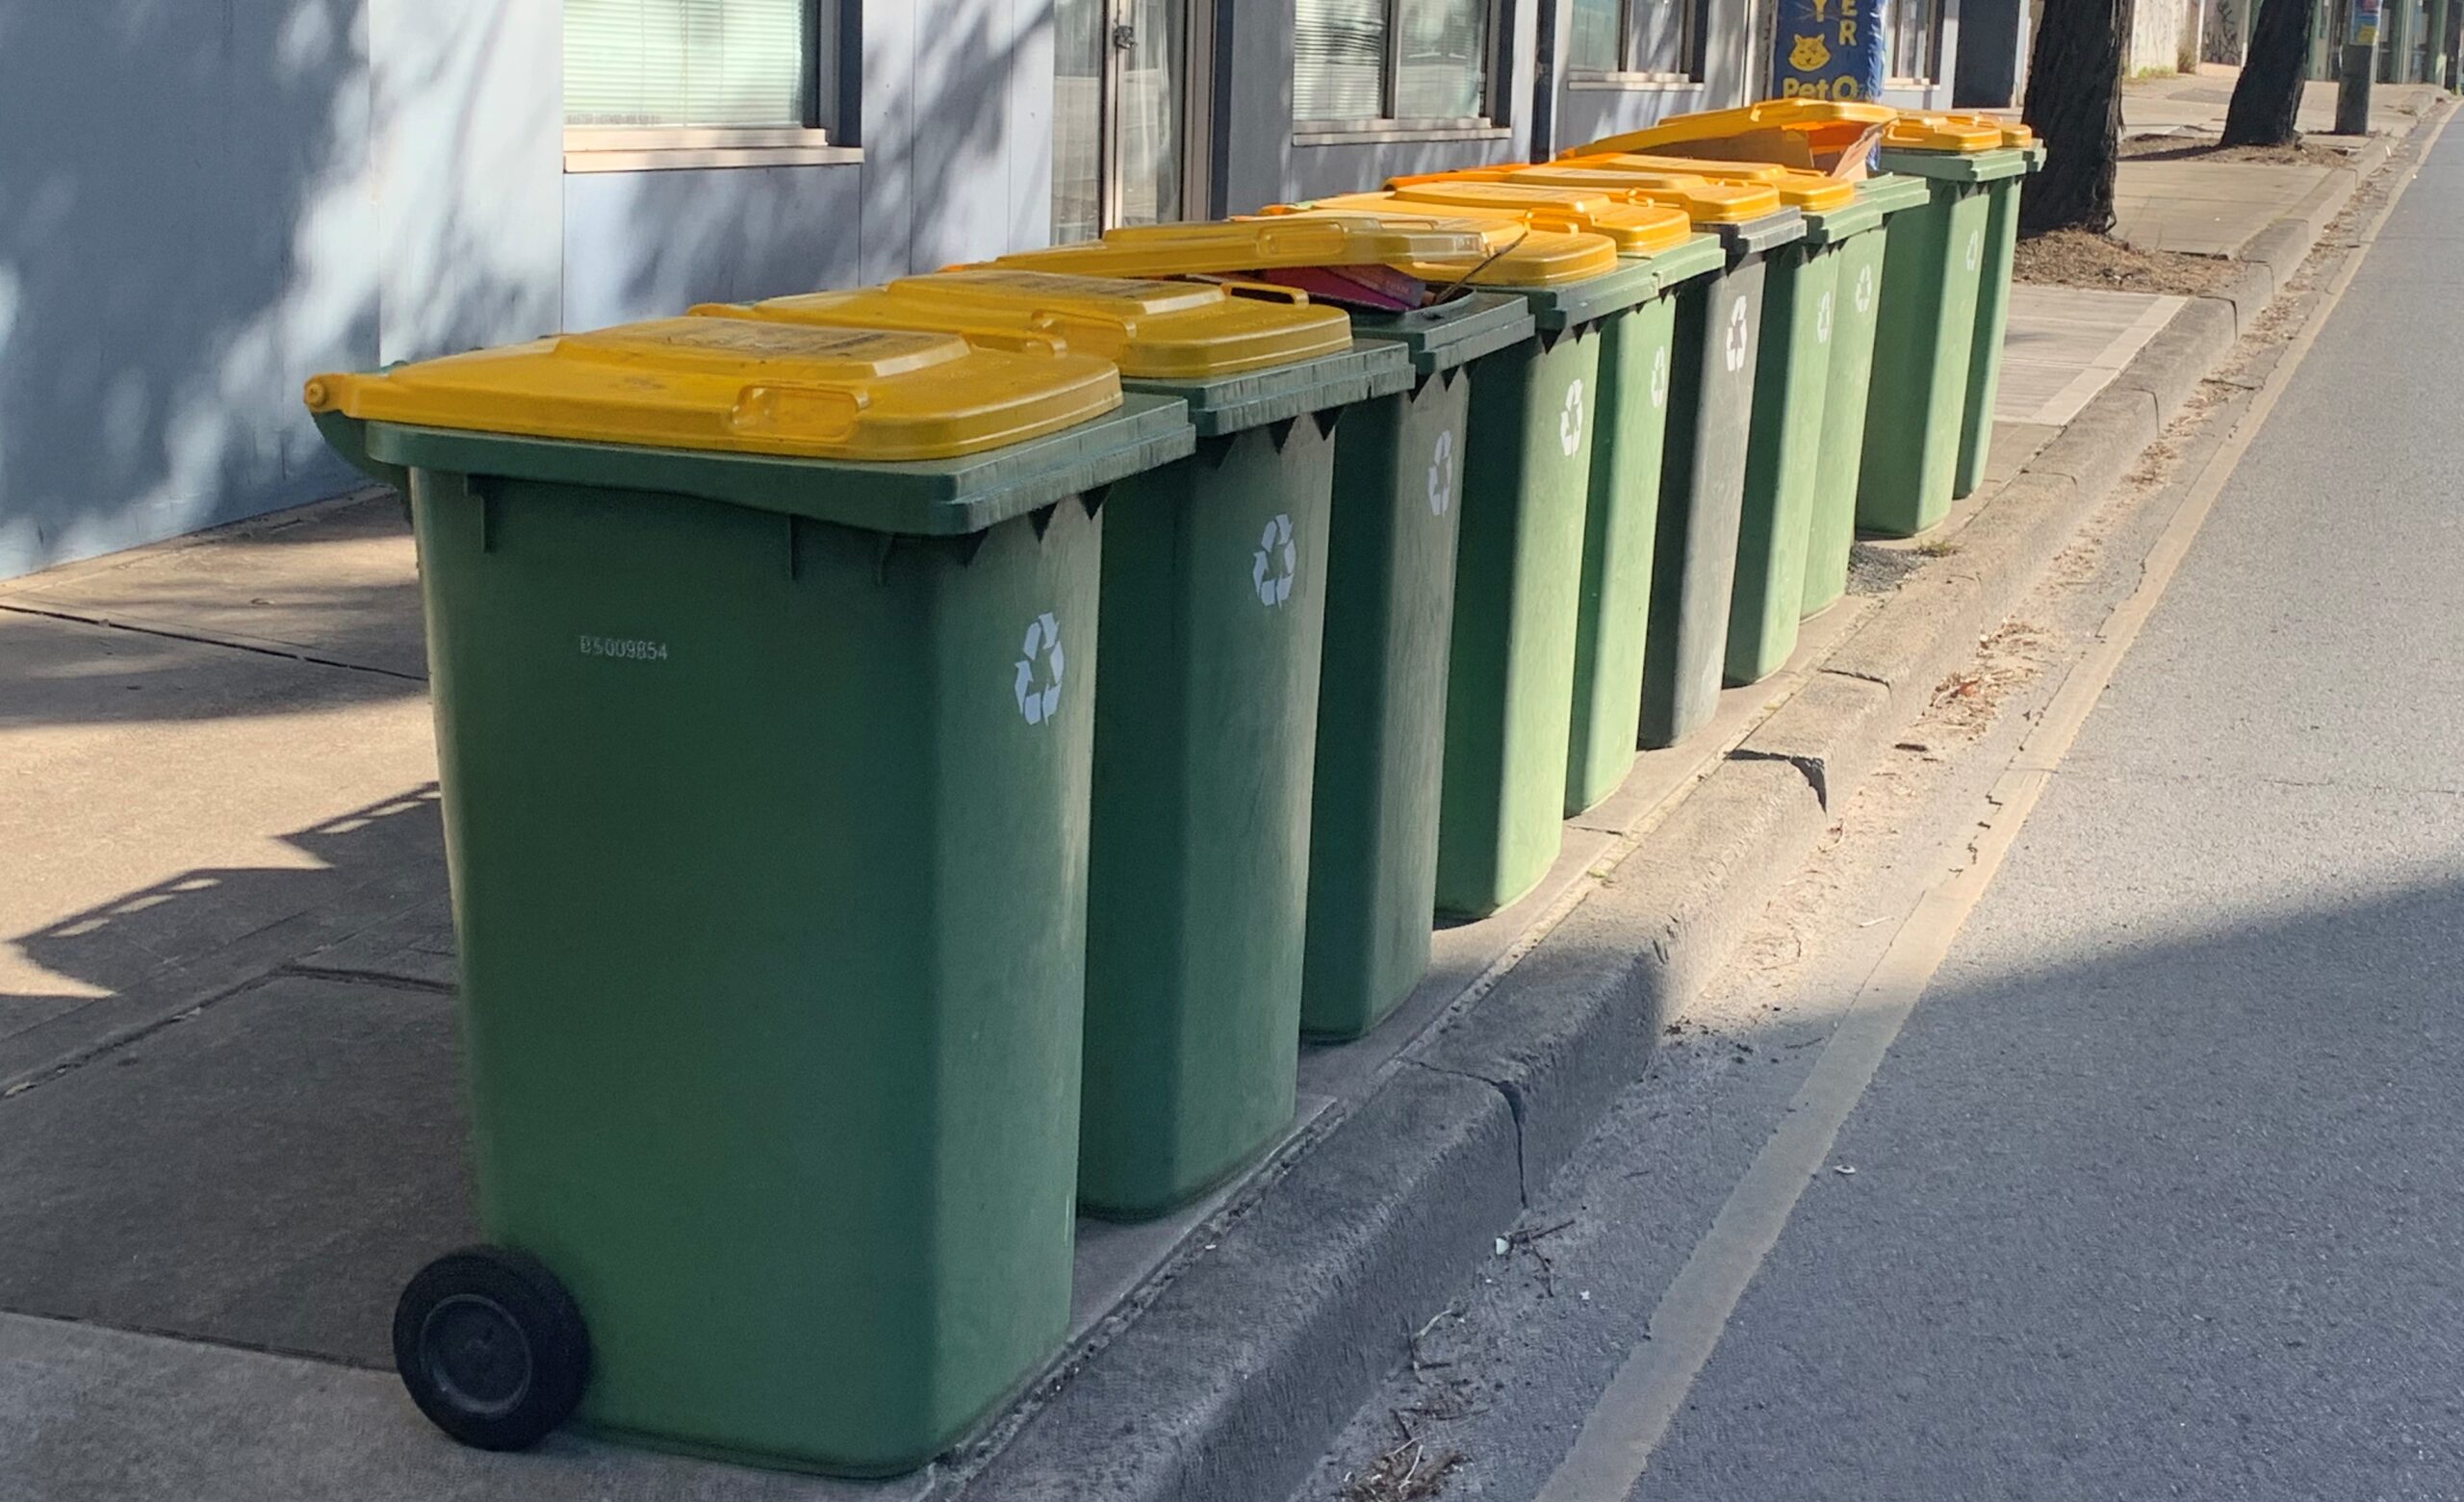 The MRA cheat sheet to yellow bin recycling – MRA Consulting Group